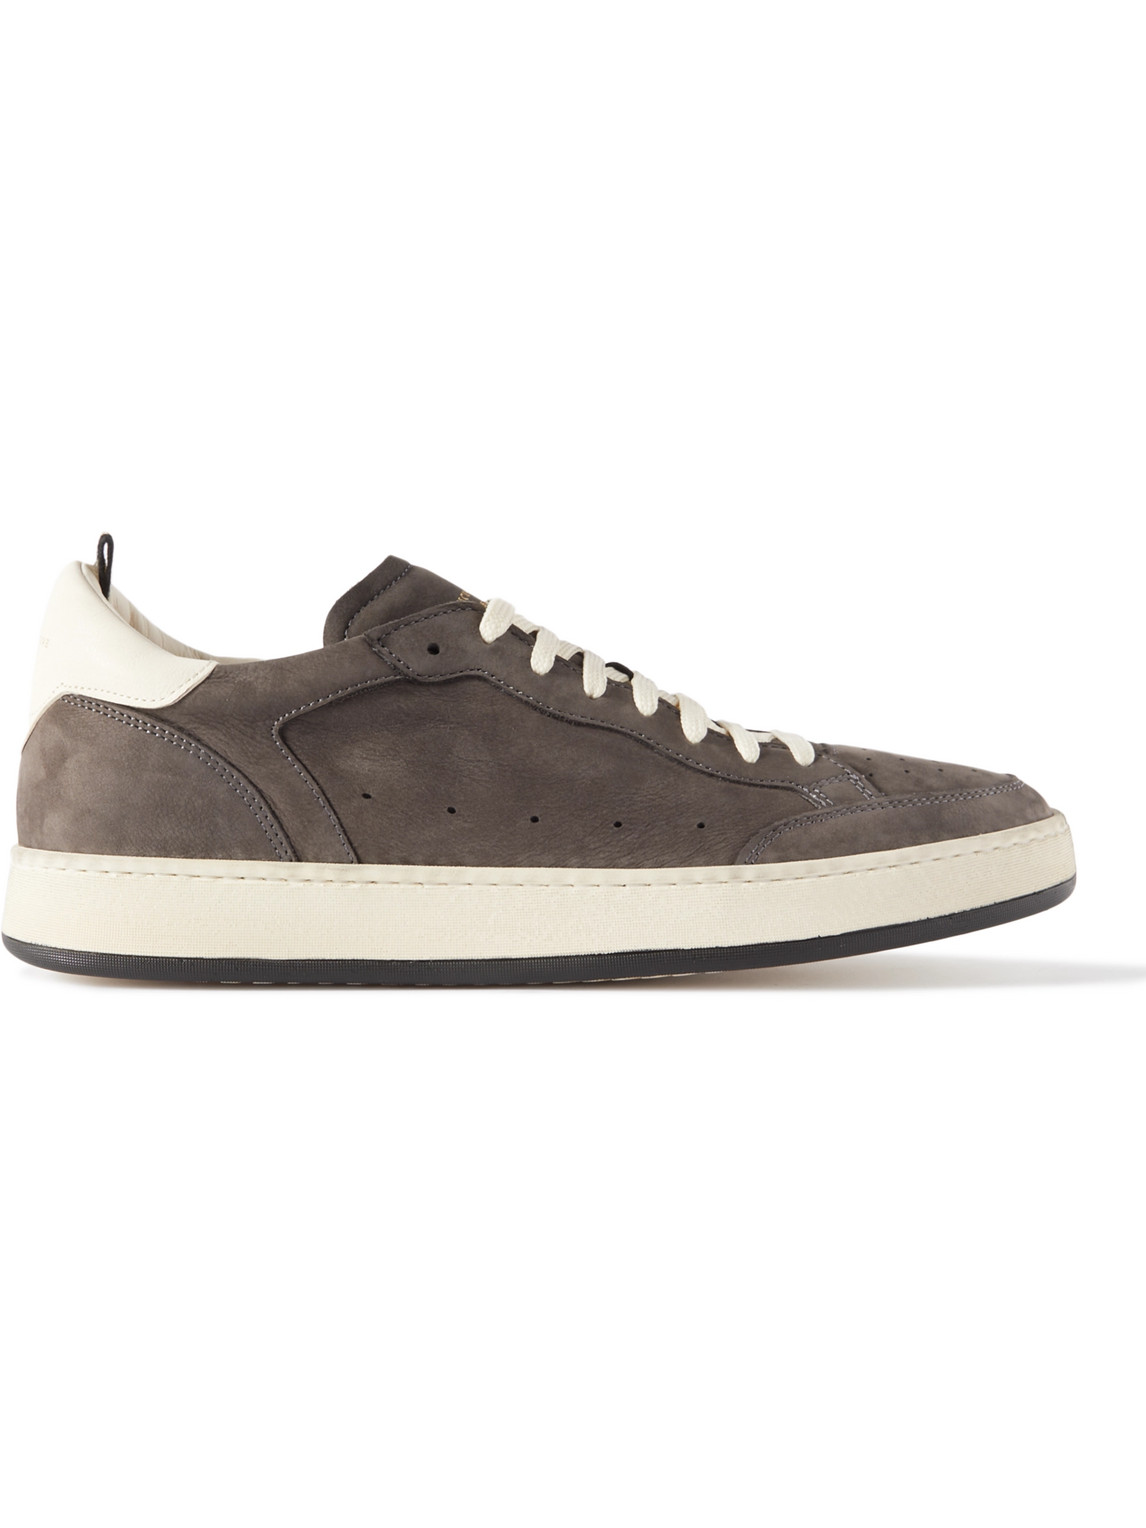 OFFICINE CREATIVE MAGIC 002 LEATHER-TRIMMED NUBUCK trainers